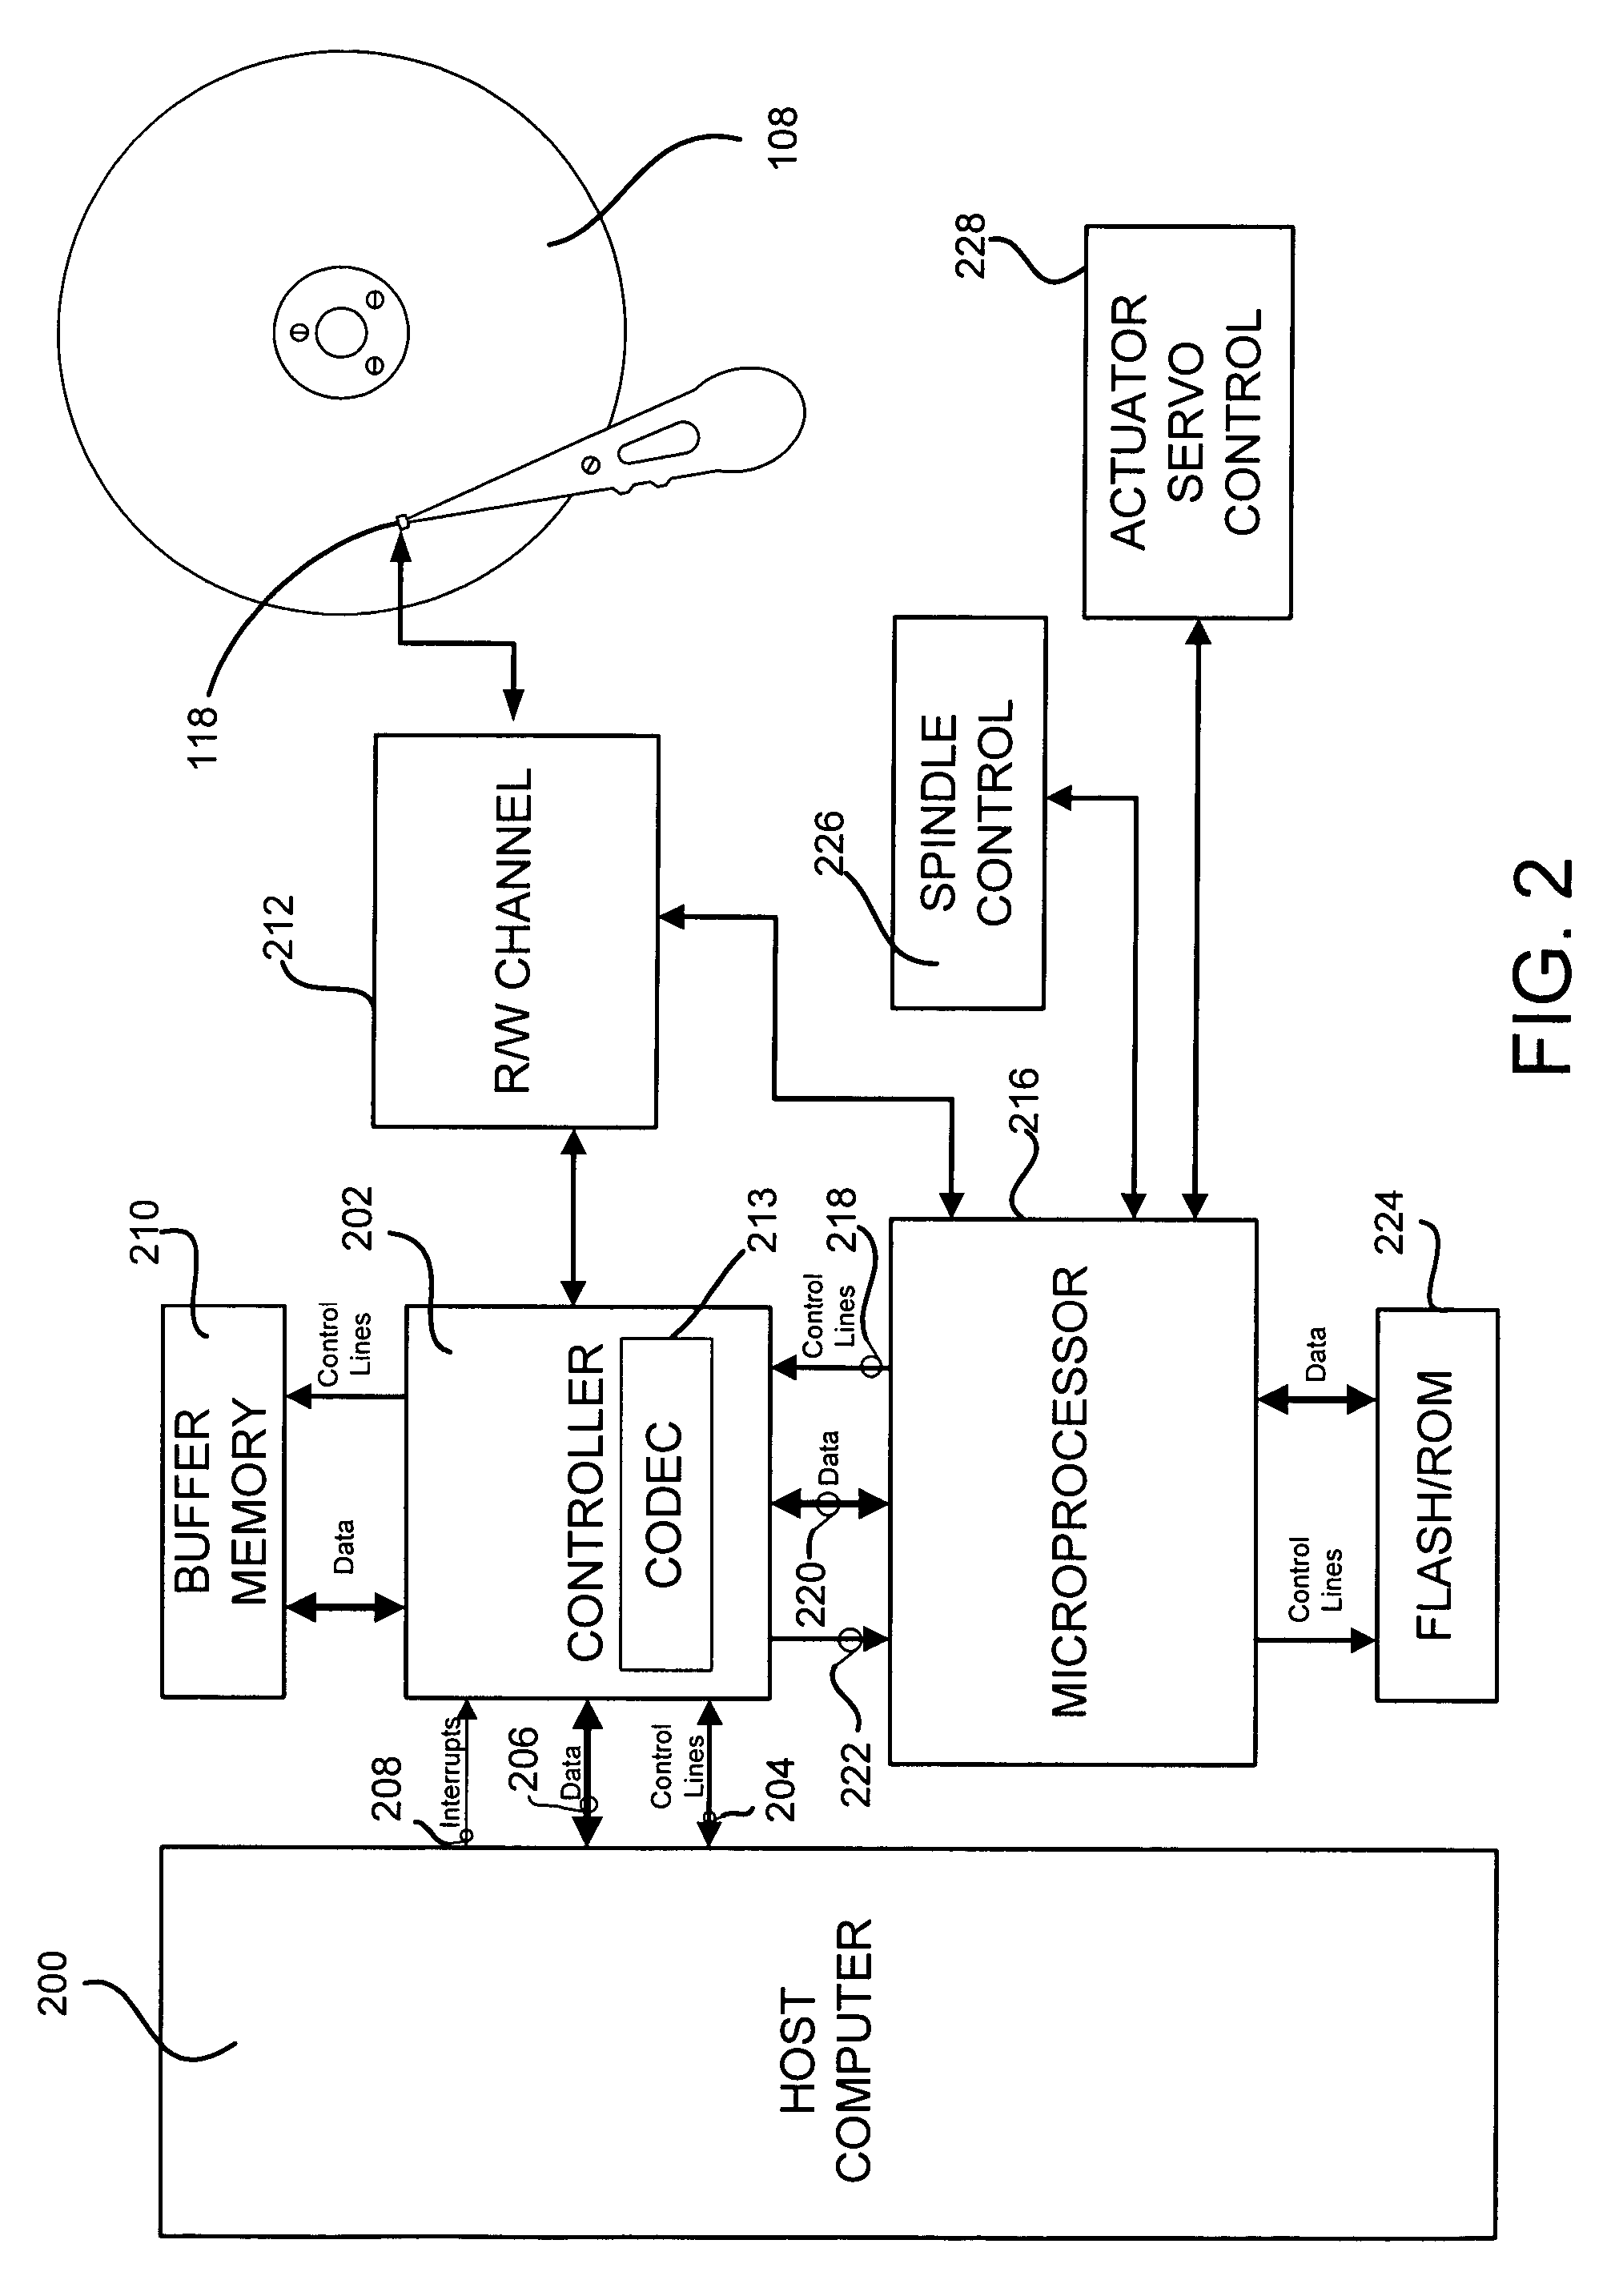 Method and apparatus for error detection